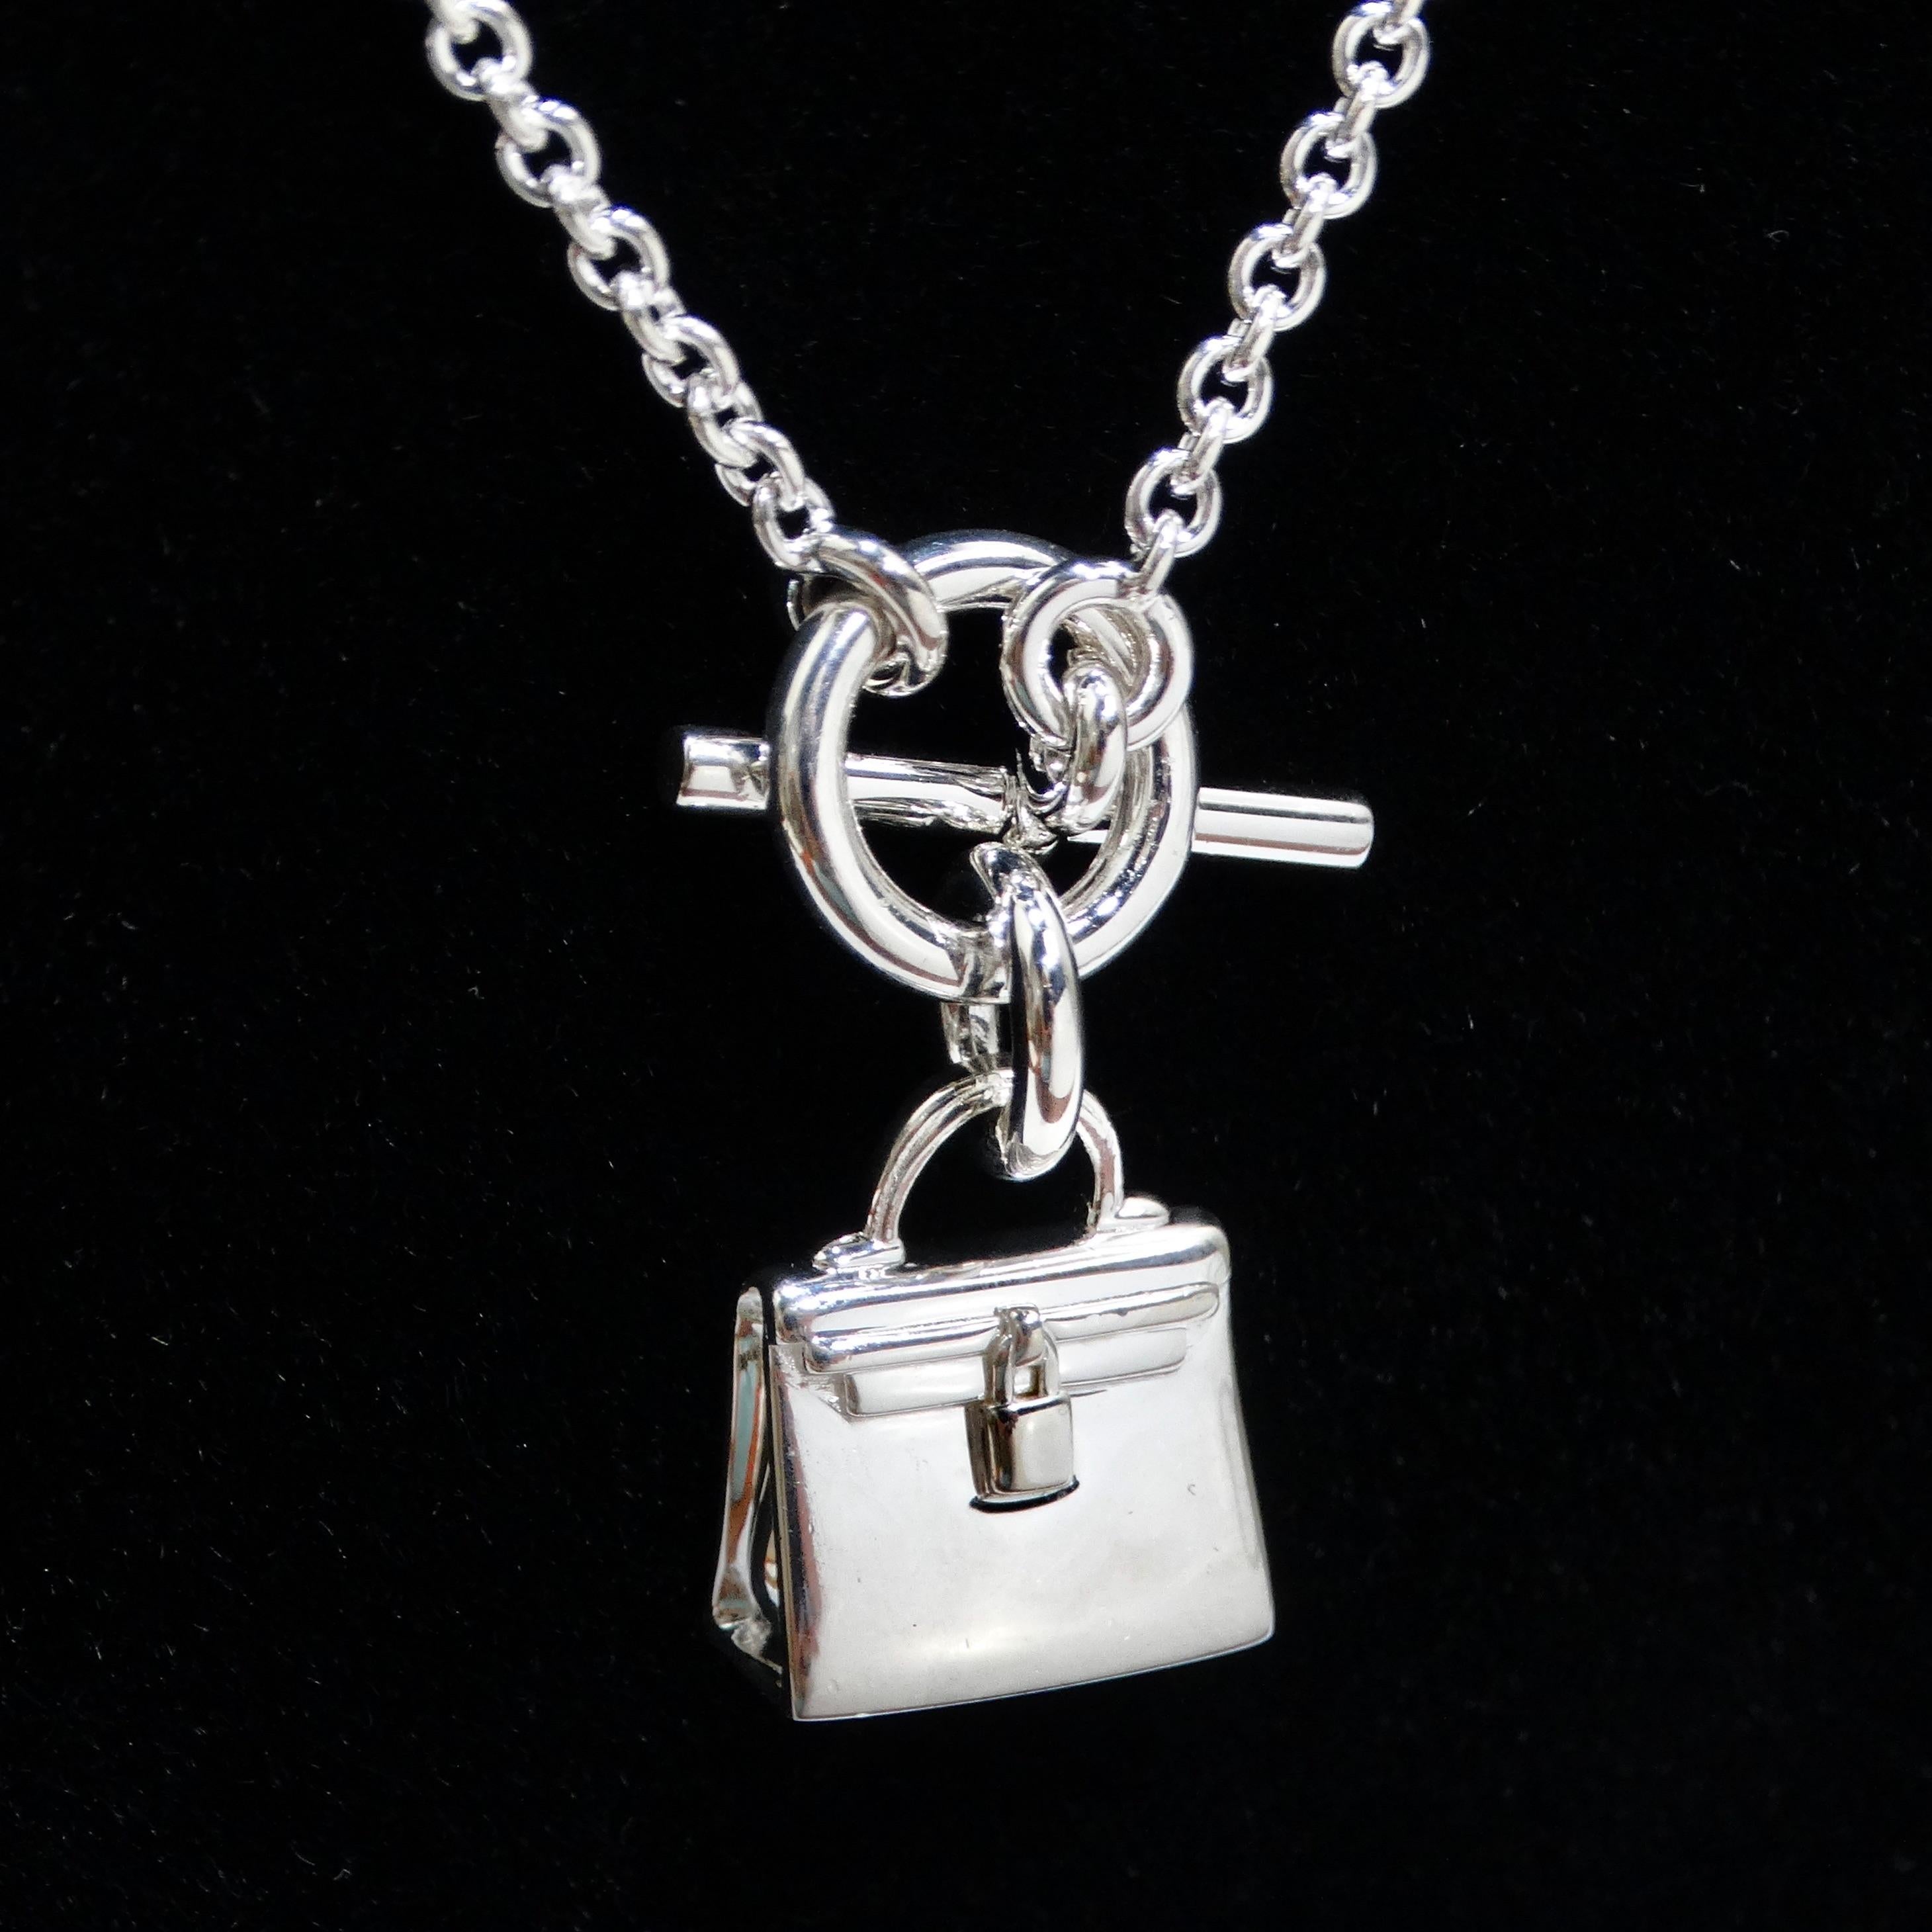 Hermes Amulet 925 Silver Kelly Pendant Necklace In Good Condition For Sale In Scottsdale, AZ